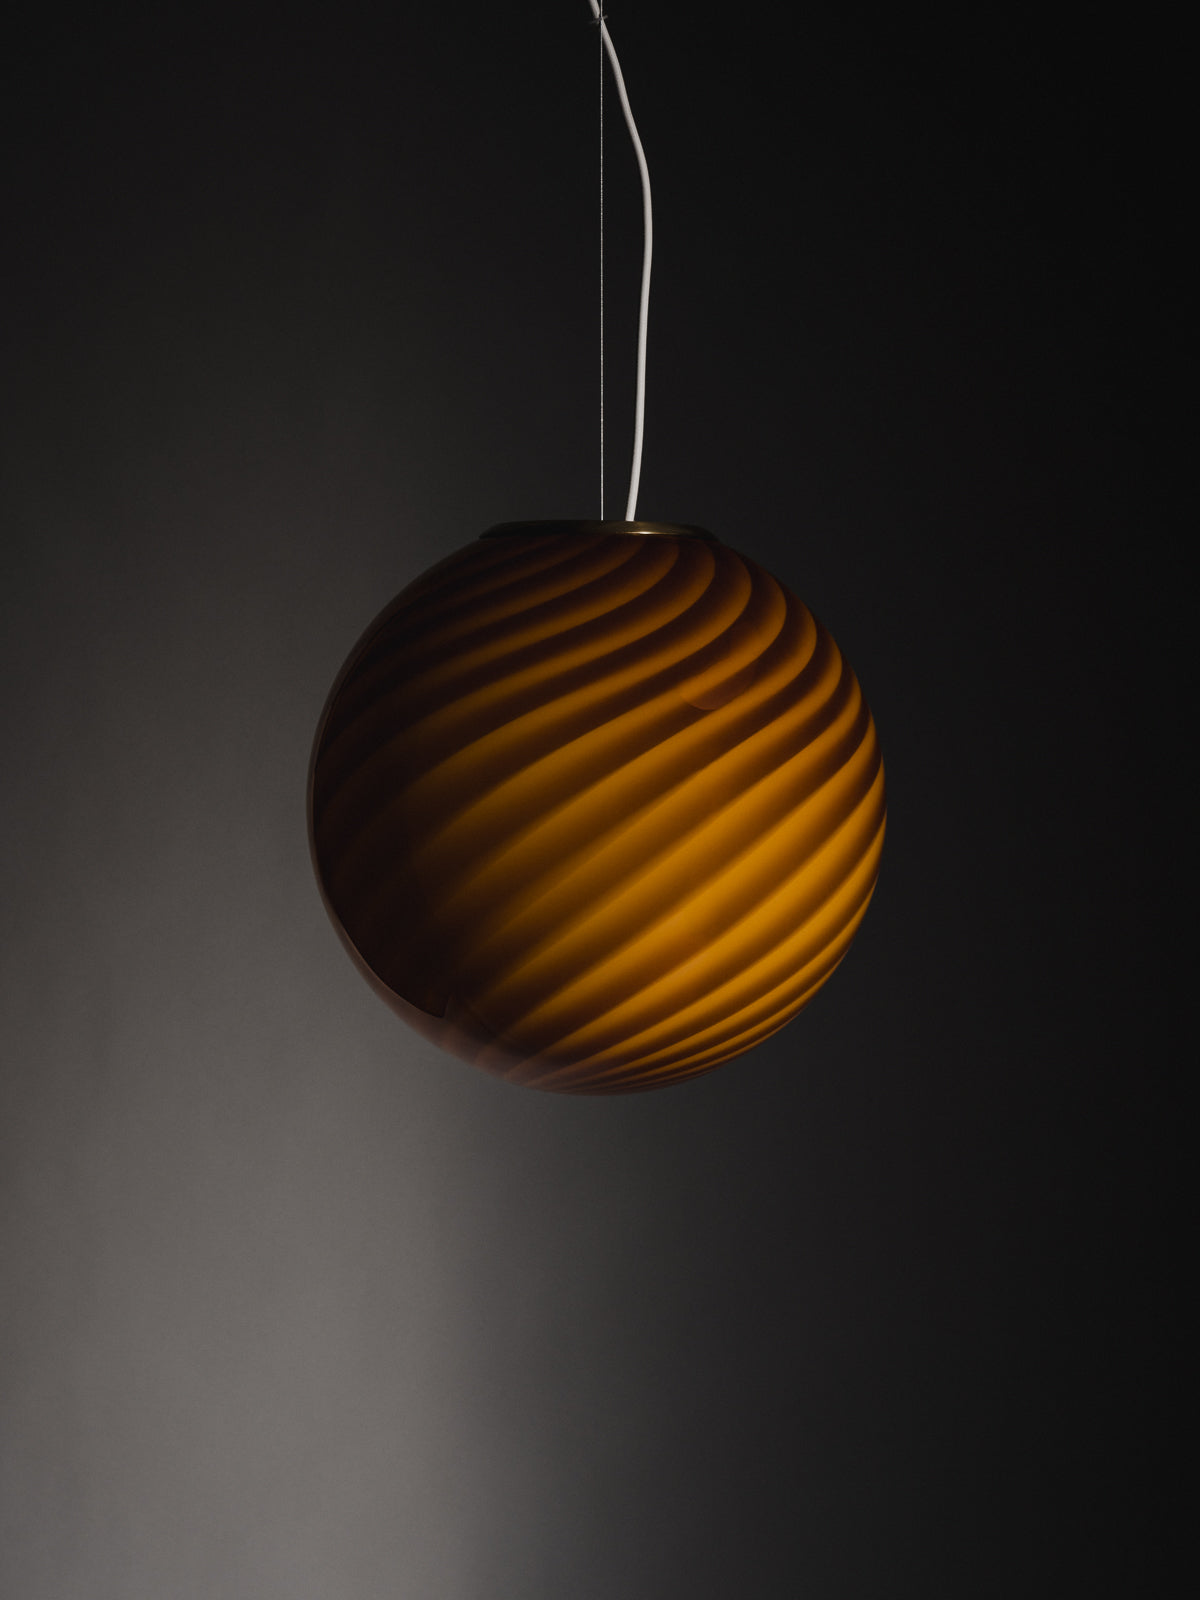 limited edition Murano Vetri glass pendant sculptural sphere-shaped pendant crafted from mouth-blown swirl opaline glass in Ambra: a bright and warm hue with golden undertones. Brass fitting hardware suspension. Murano ravgul pendel lampe I glas med swirl. Copenhagen Venice 